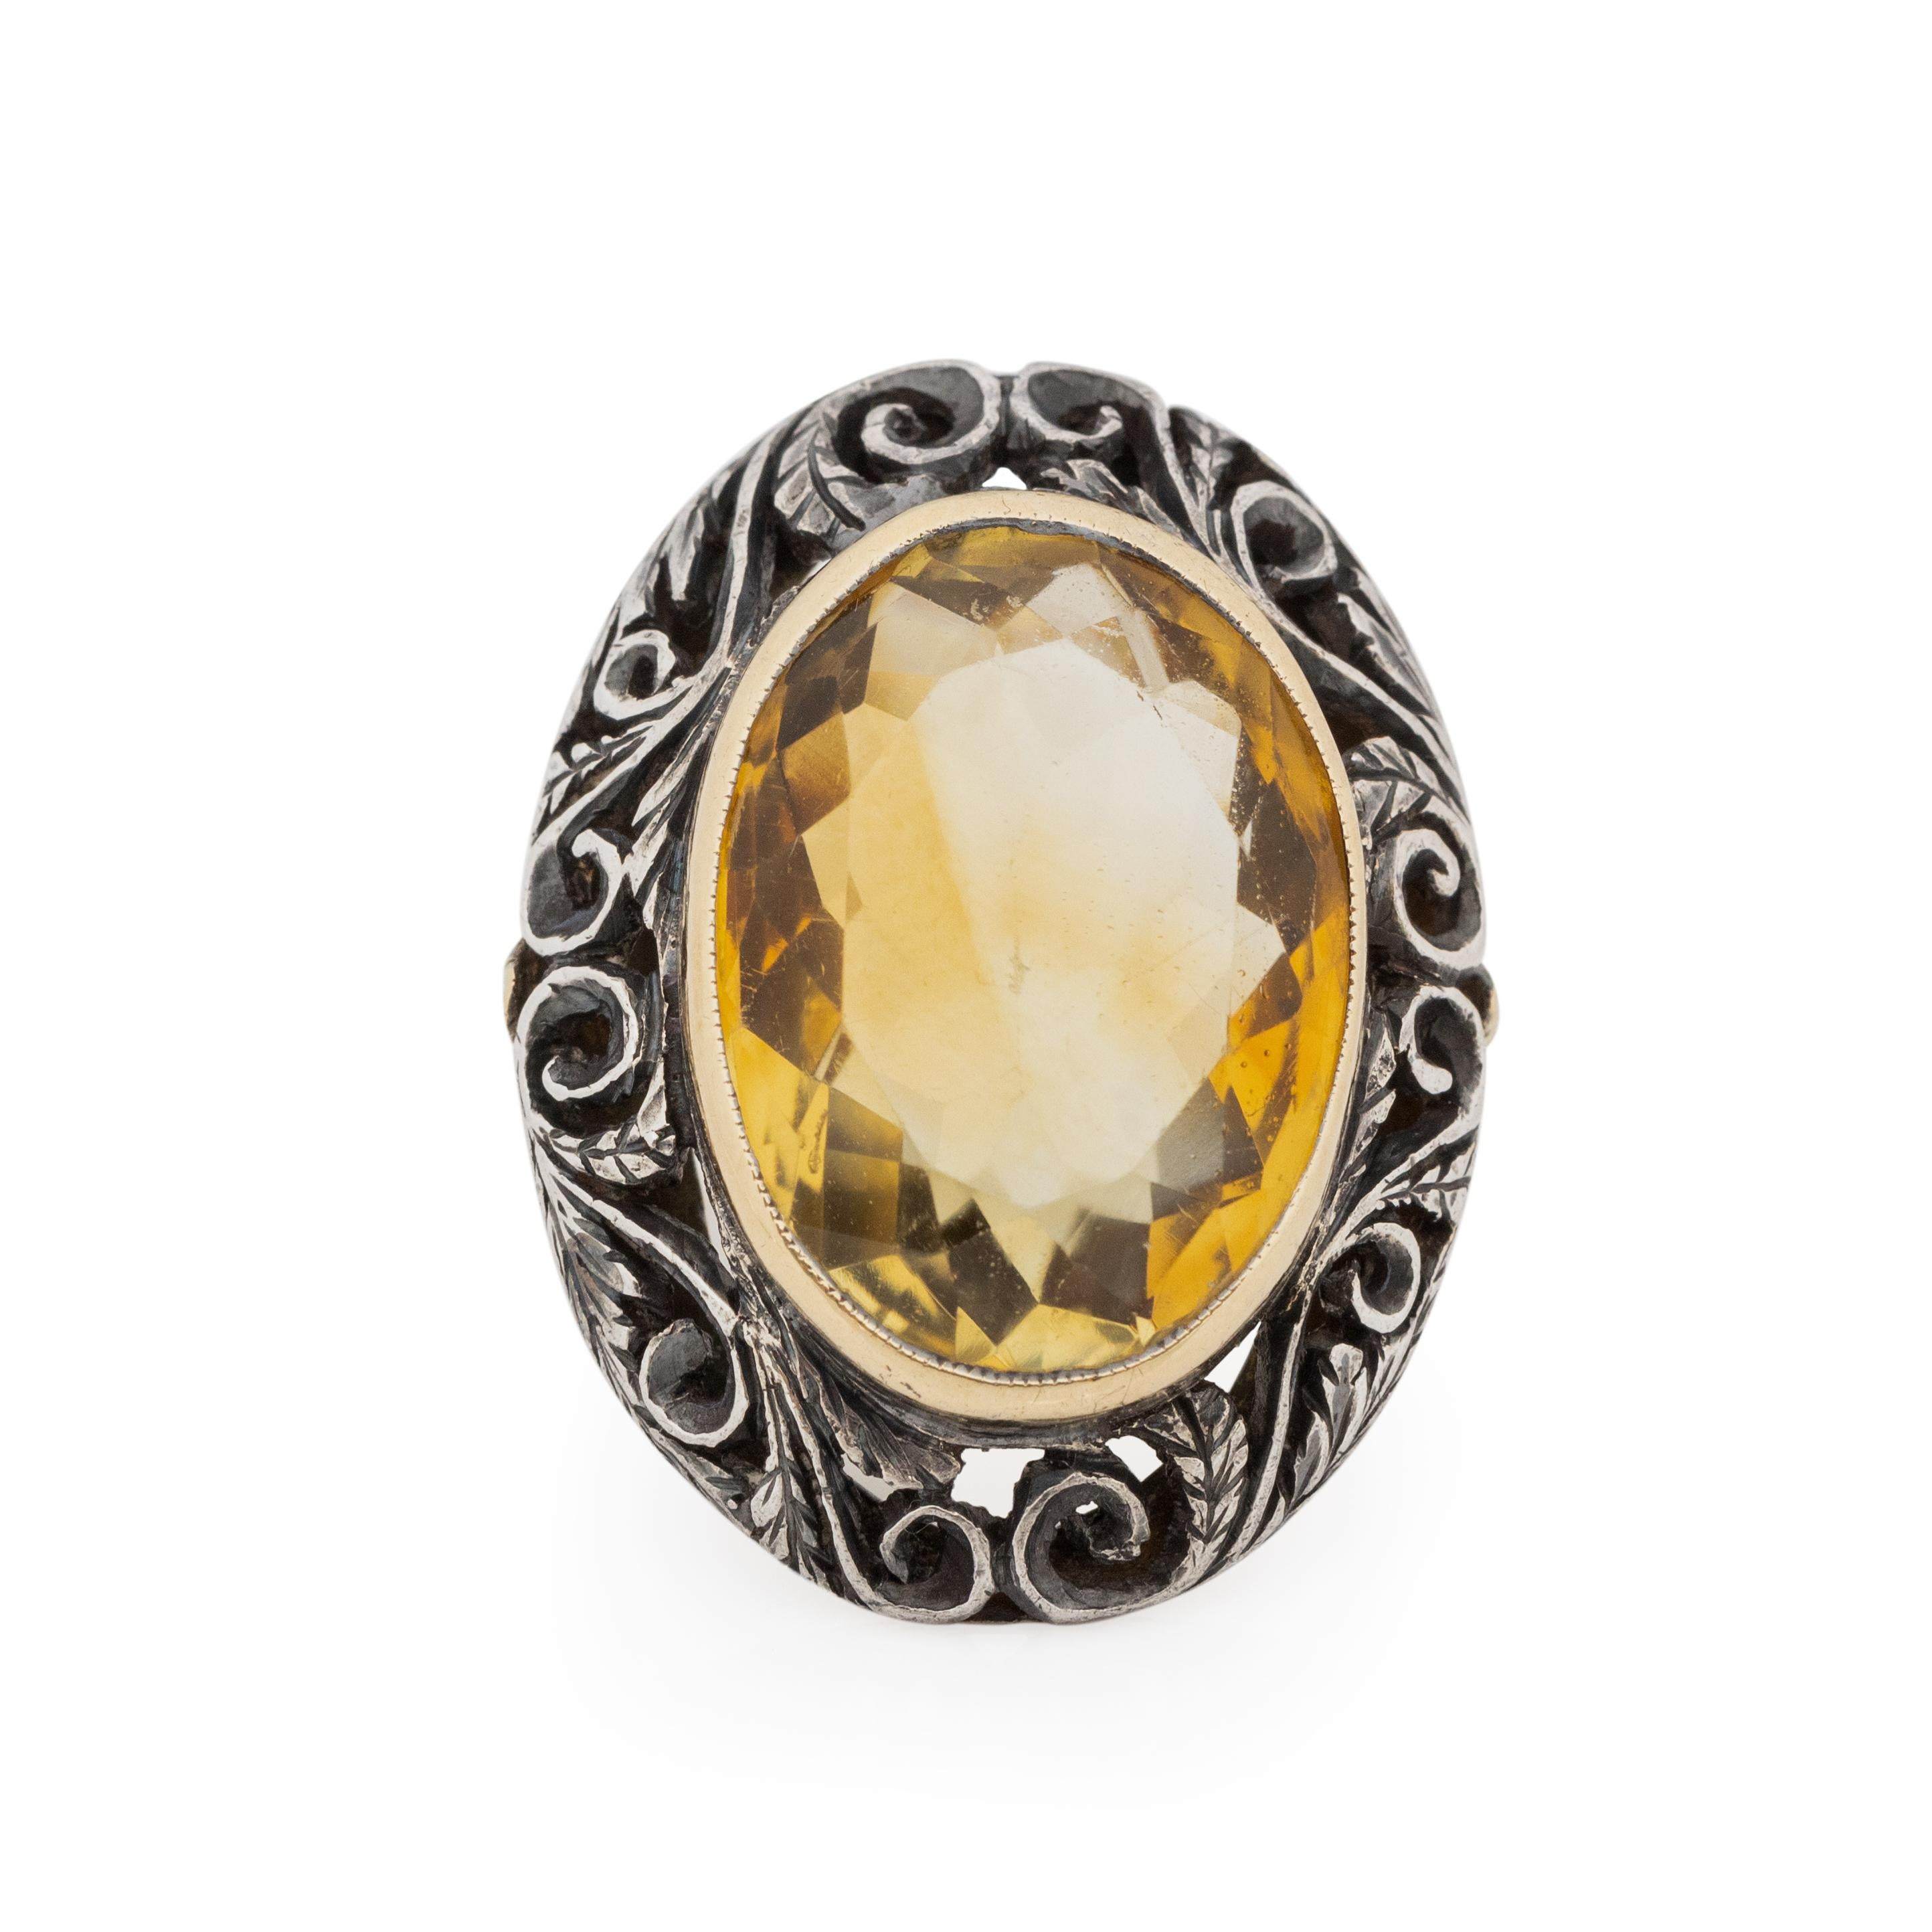 This eye catching beauty is a show stopper! Crafted in 18K yellow gold that makes up the shanks and the bezel that holds the beautiful citrine, it is also made of sterling silver. The silver is a carved halo that surrounds the gold set citrine